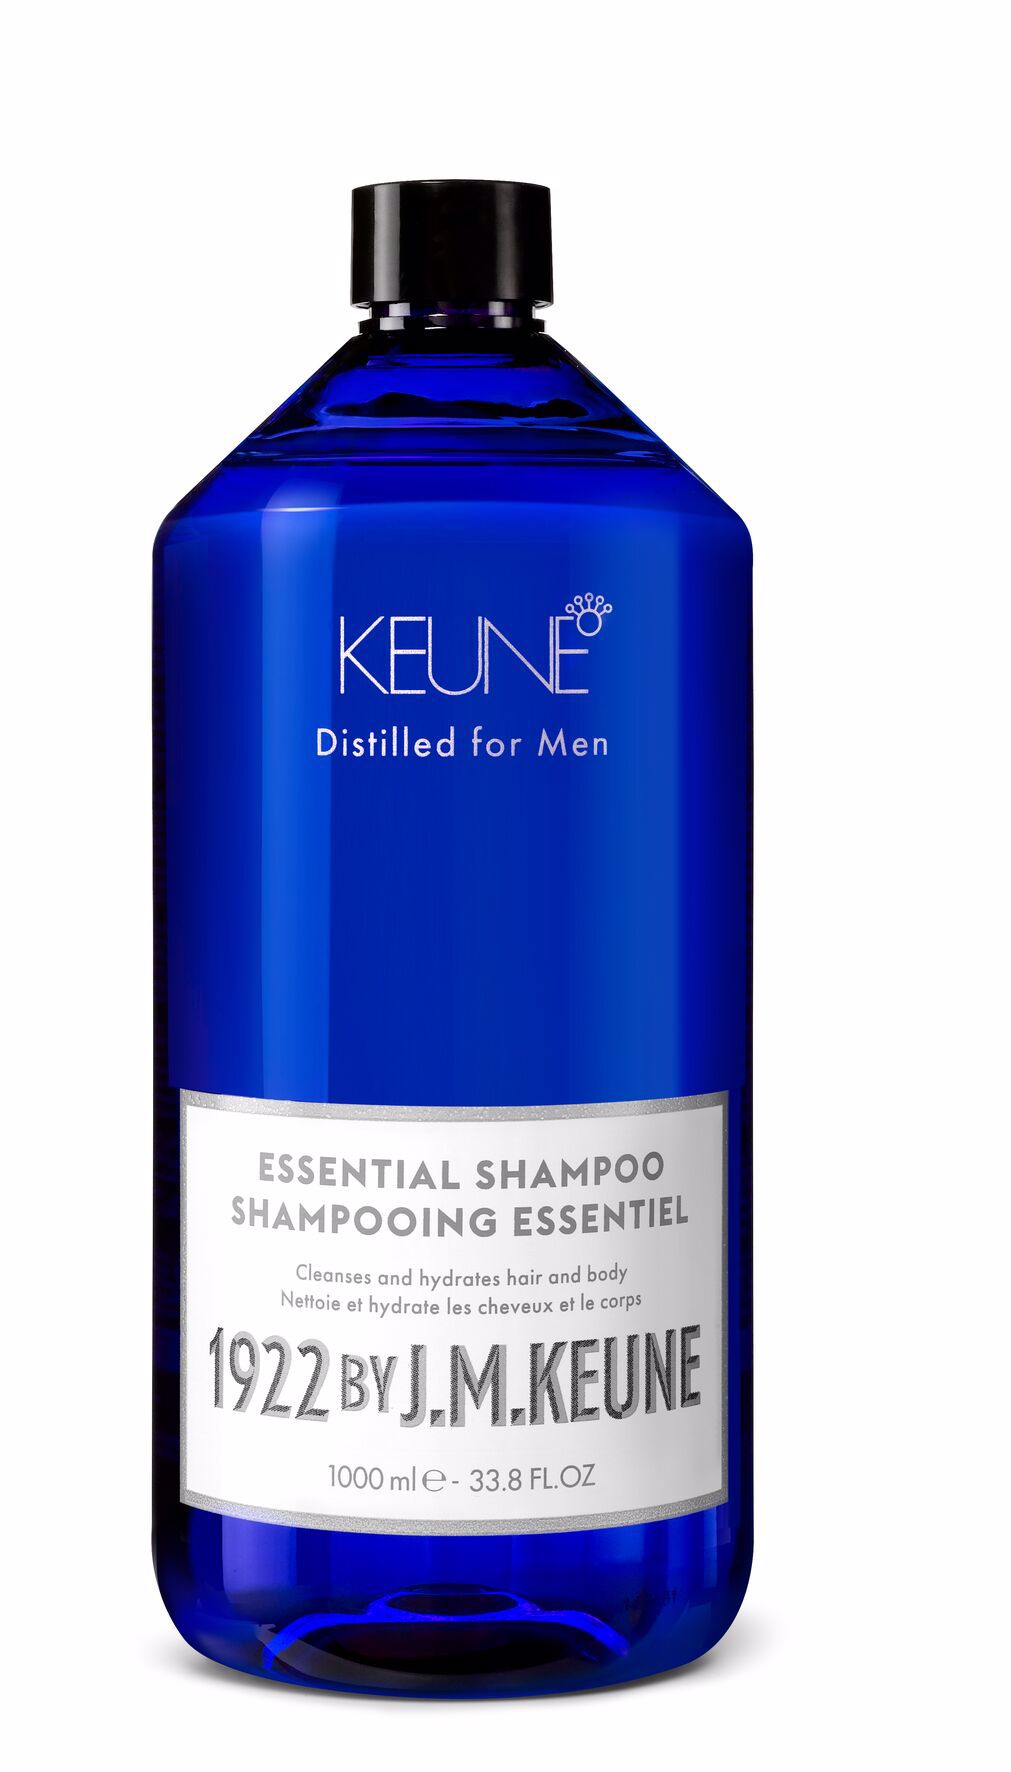 Our Essential Shampoo for men thoroughly cleans hair, beard, and body daily. Creatine and bamboo extract ensure strong, voluminous hair. Now available on keune.ch.